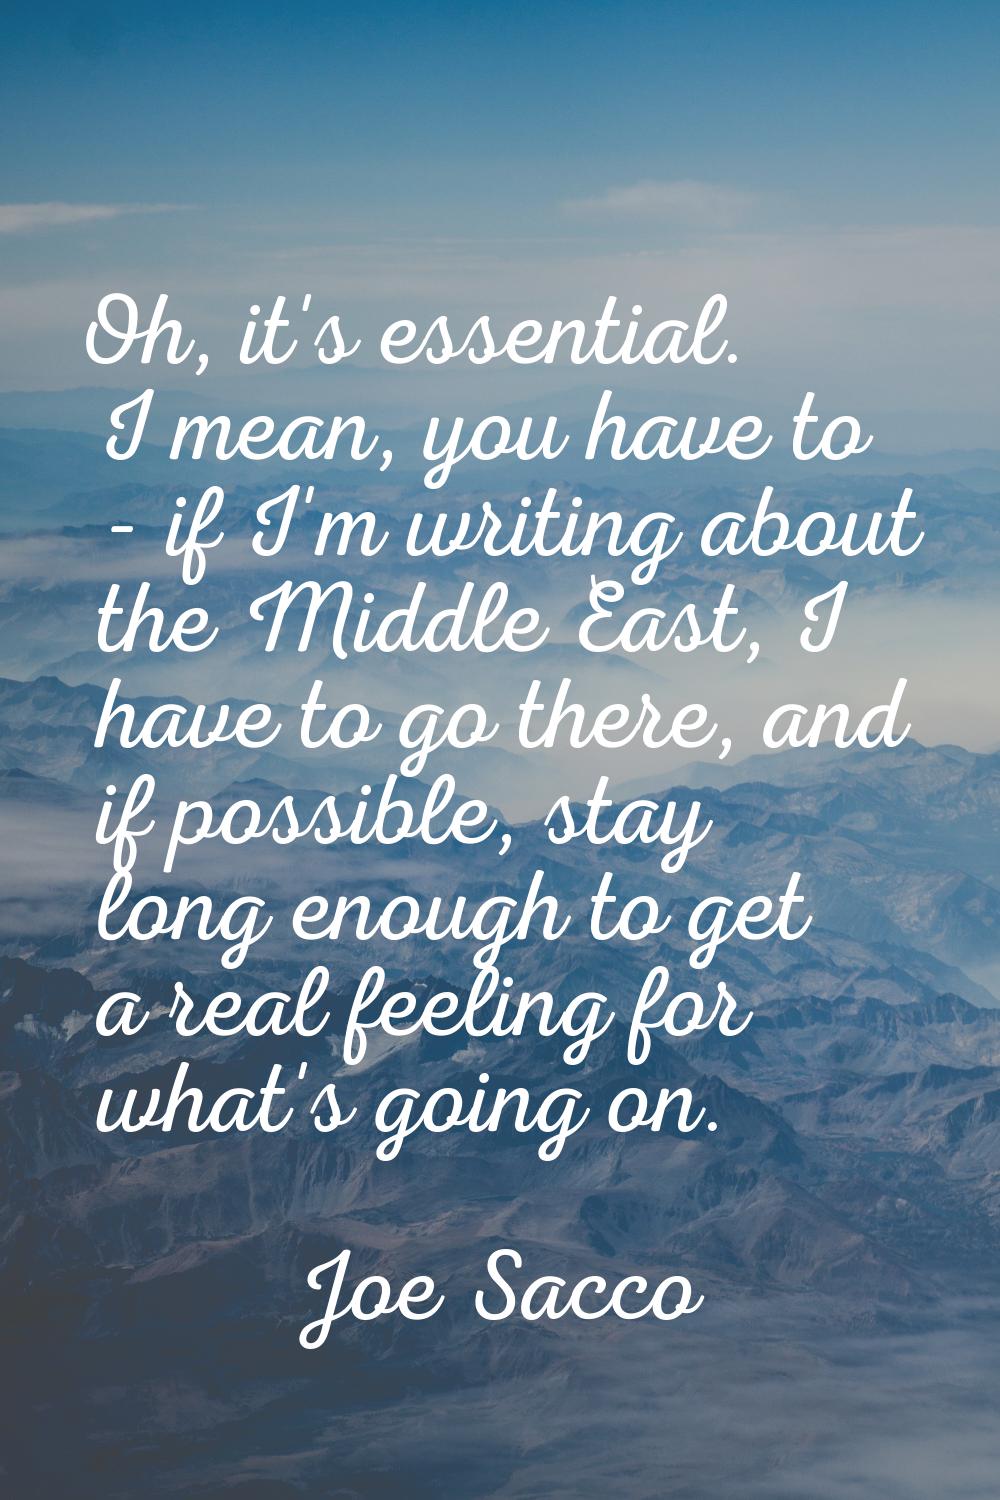 Oh, it's essential. I mean, you have to - if I'm writing about the Middle East, I have to go there,